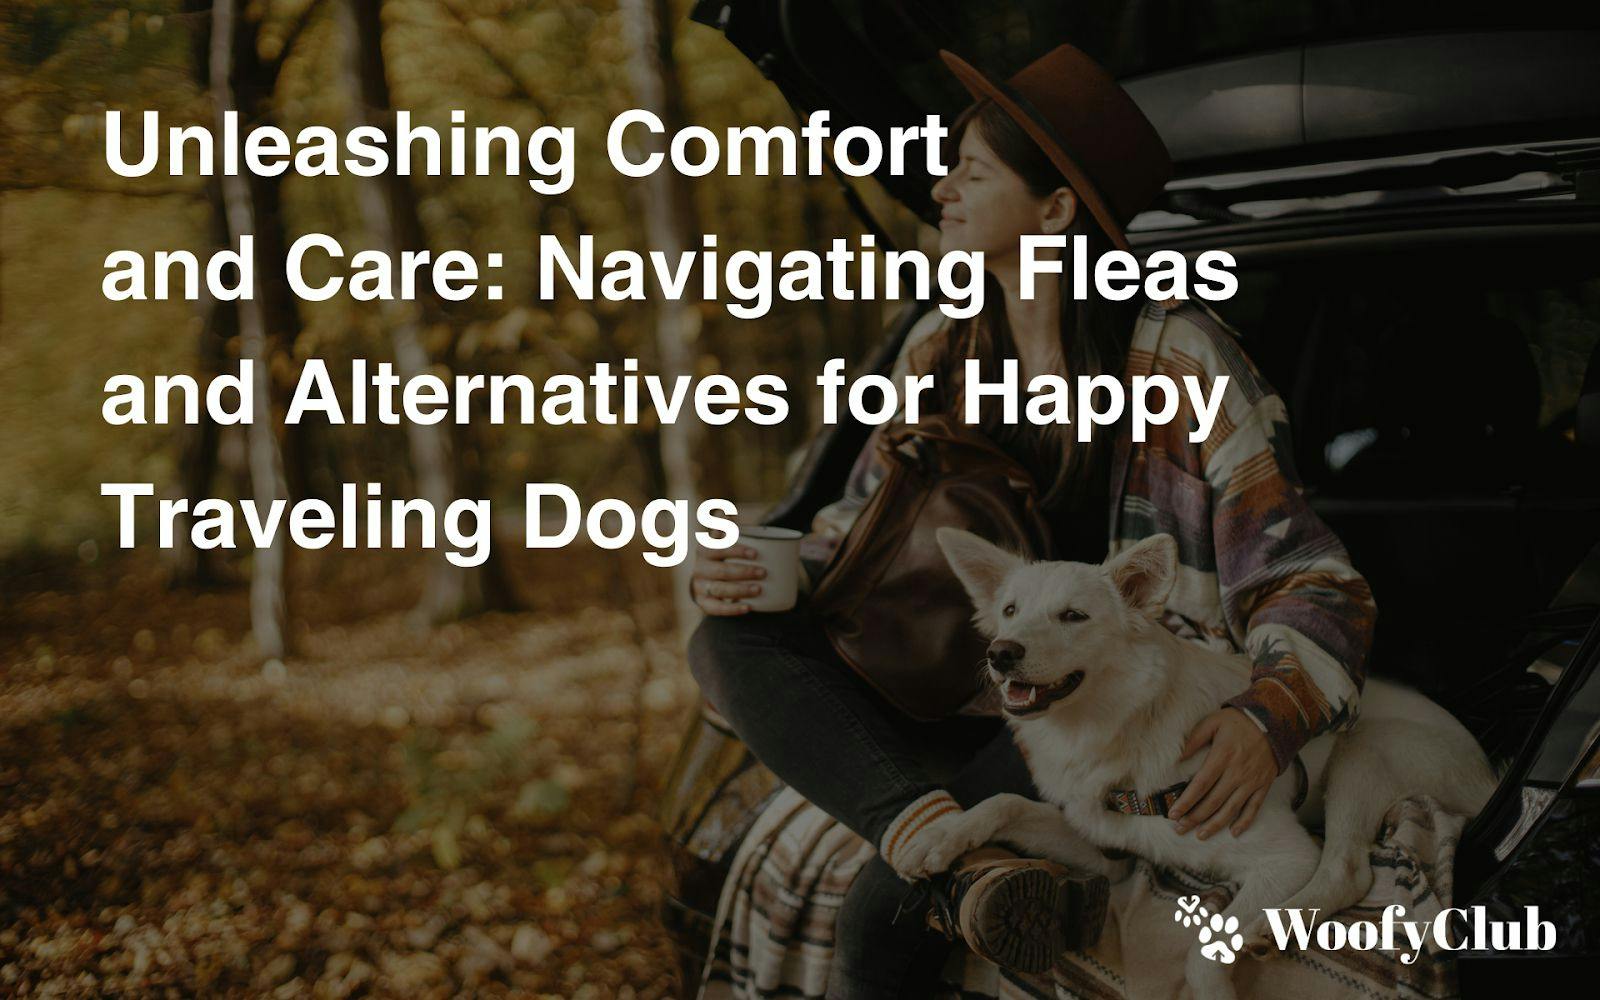 Unleashing Comfort And Care: Navigating Fleas And Alternatives For Happy Traveling Dogs